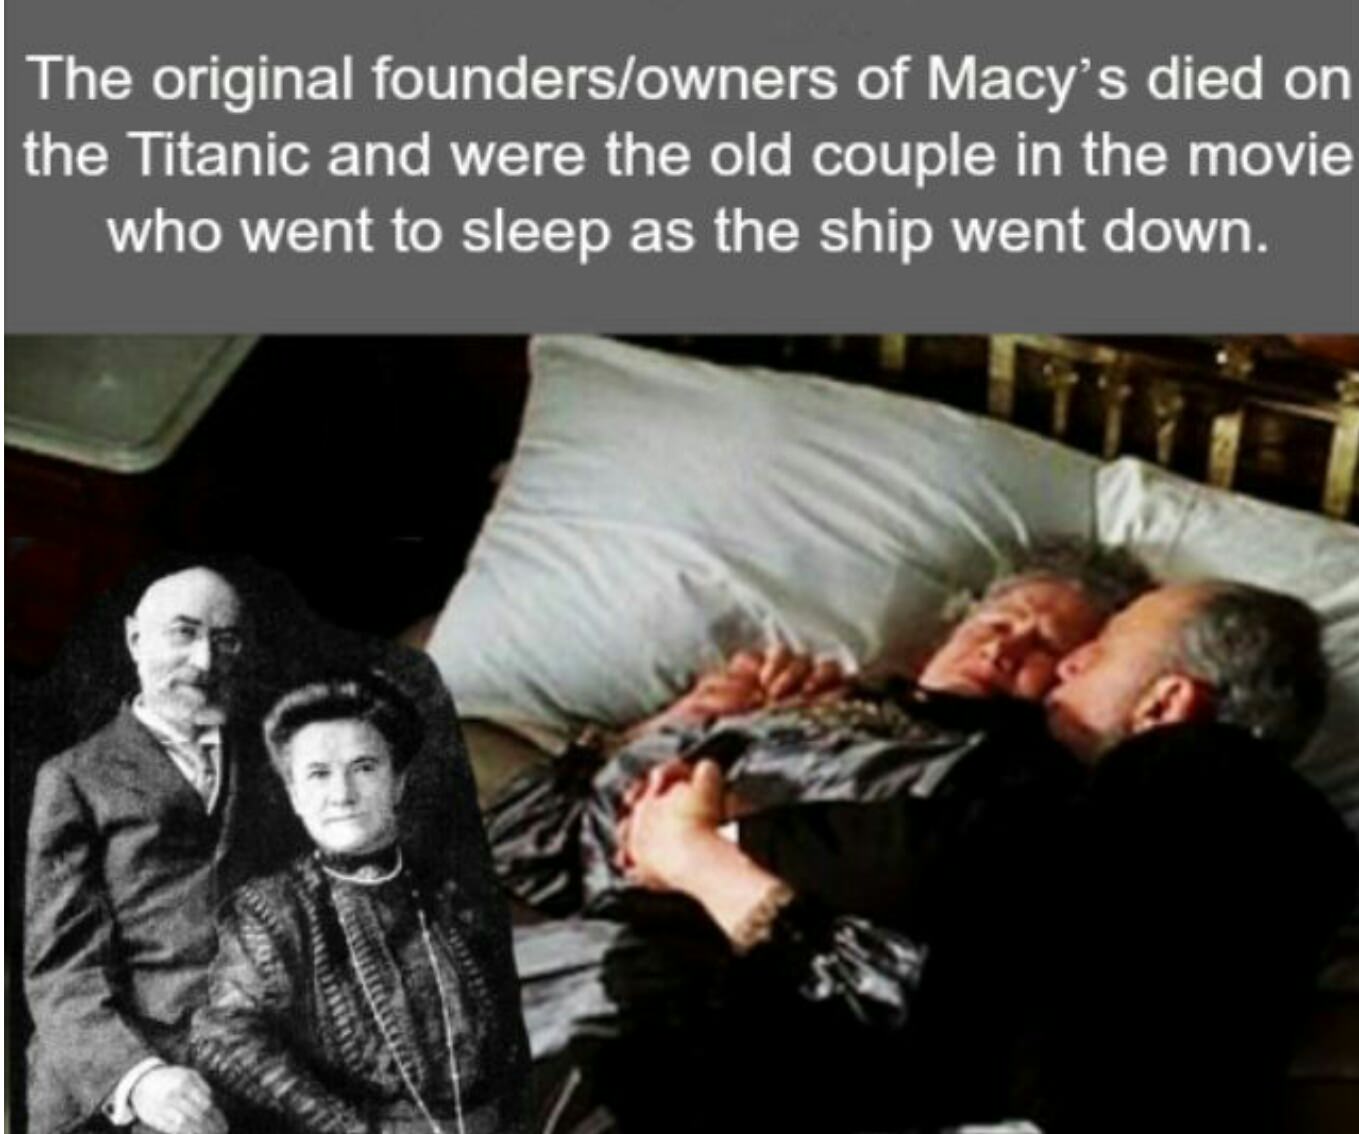 old couple titanic - The original foundersowners of Macy's died on the Titanic and were the old couple in the movie who went to sleep as the ship went down.